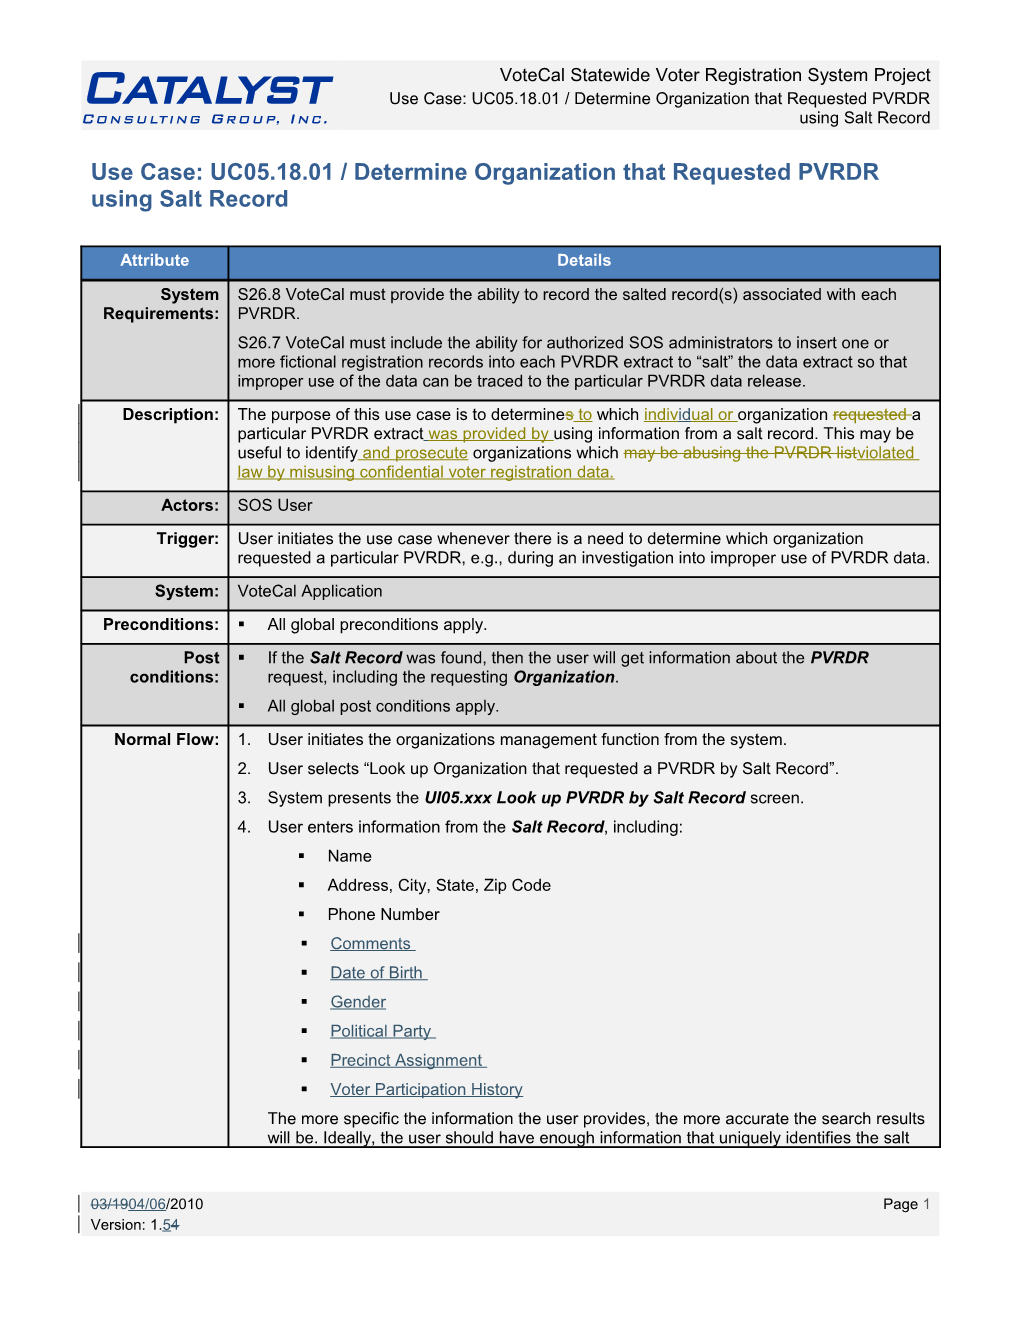 Use Case: UC05.18.01 / Determine Organization That Requested PVRDR Using Salt Record